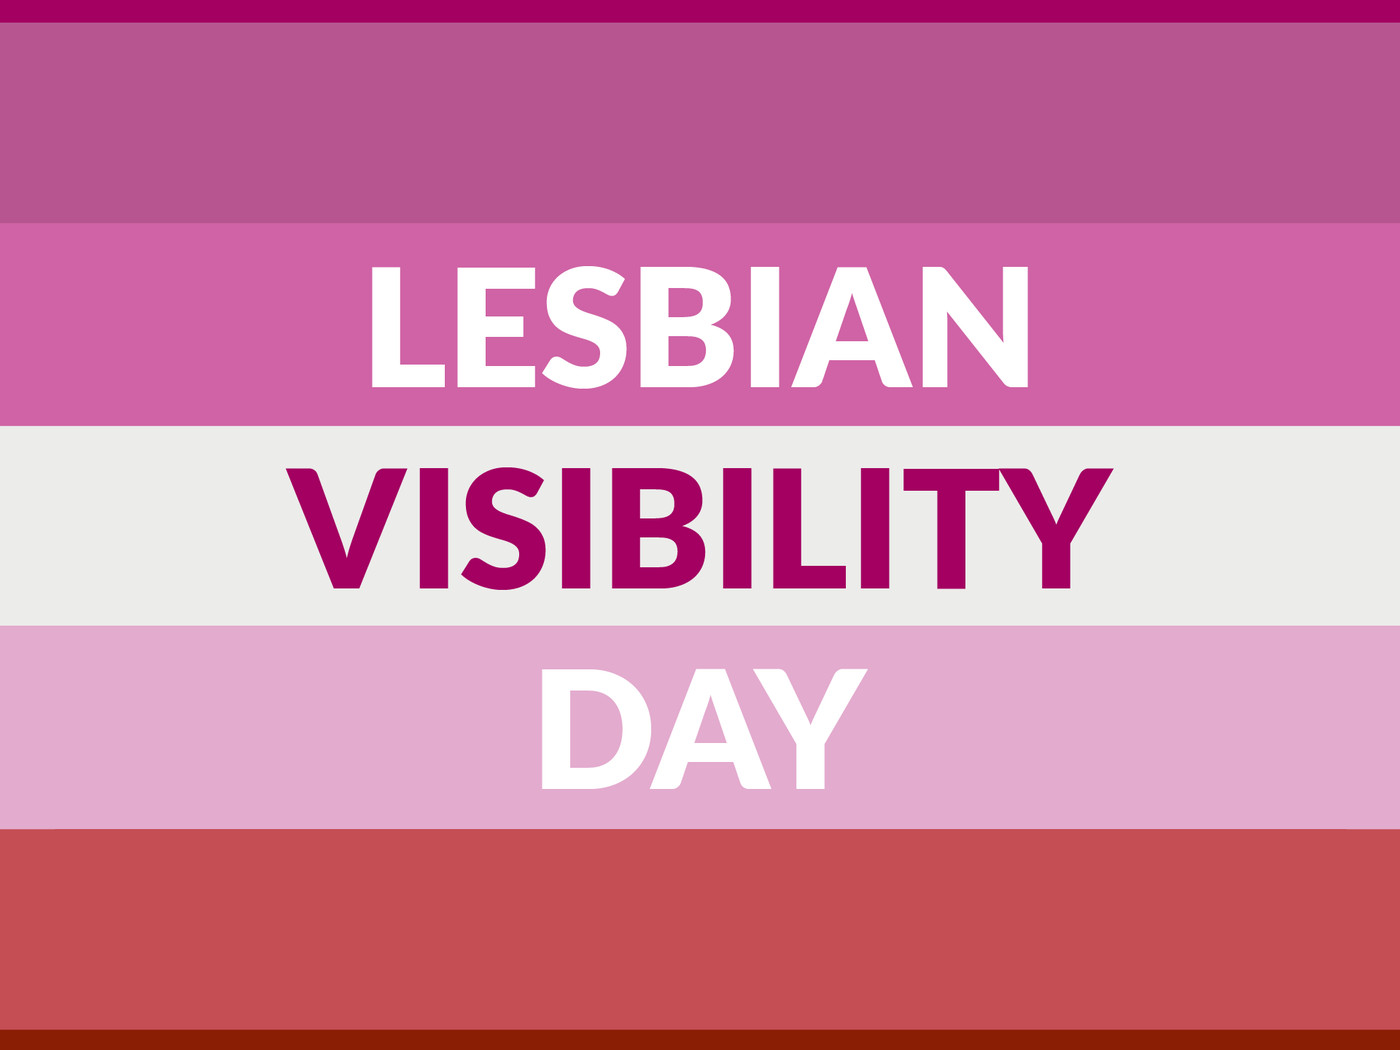 Sunday was Lesbian Visibility Day